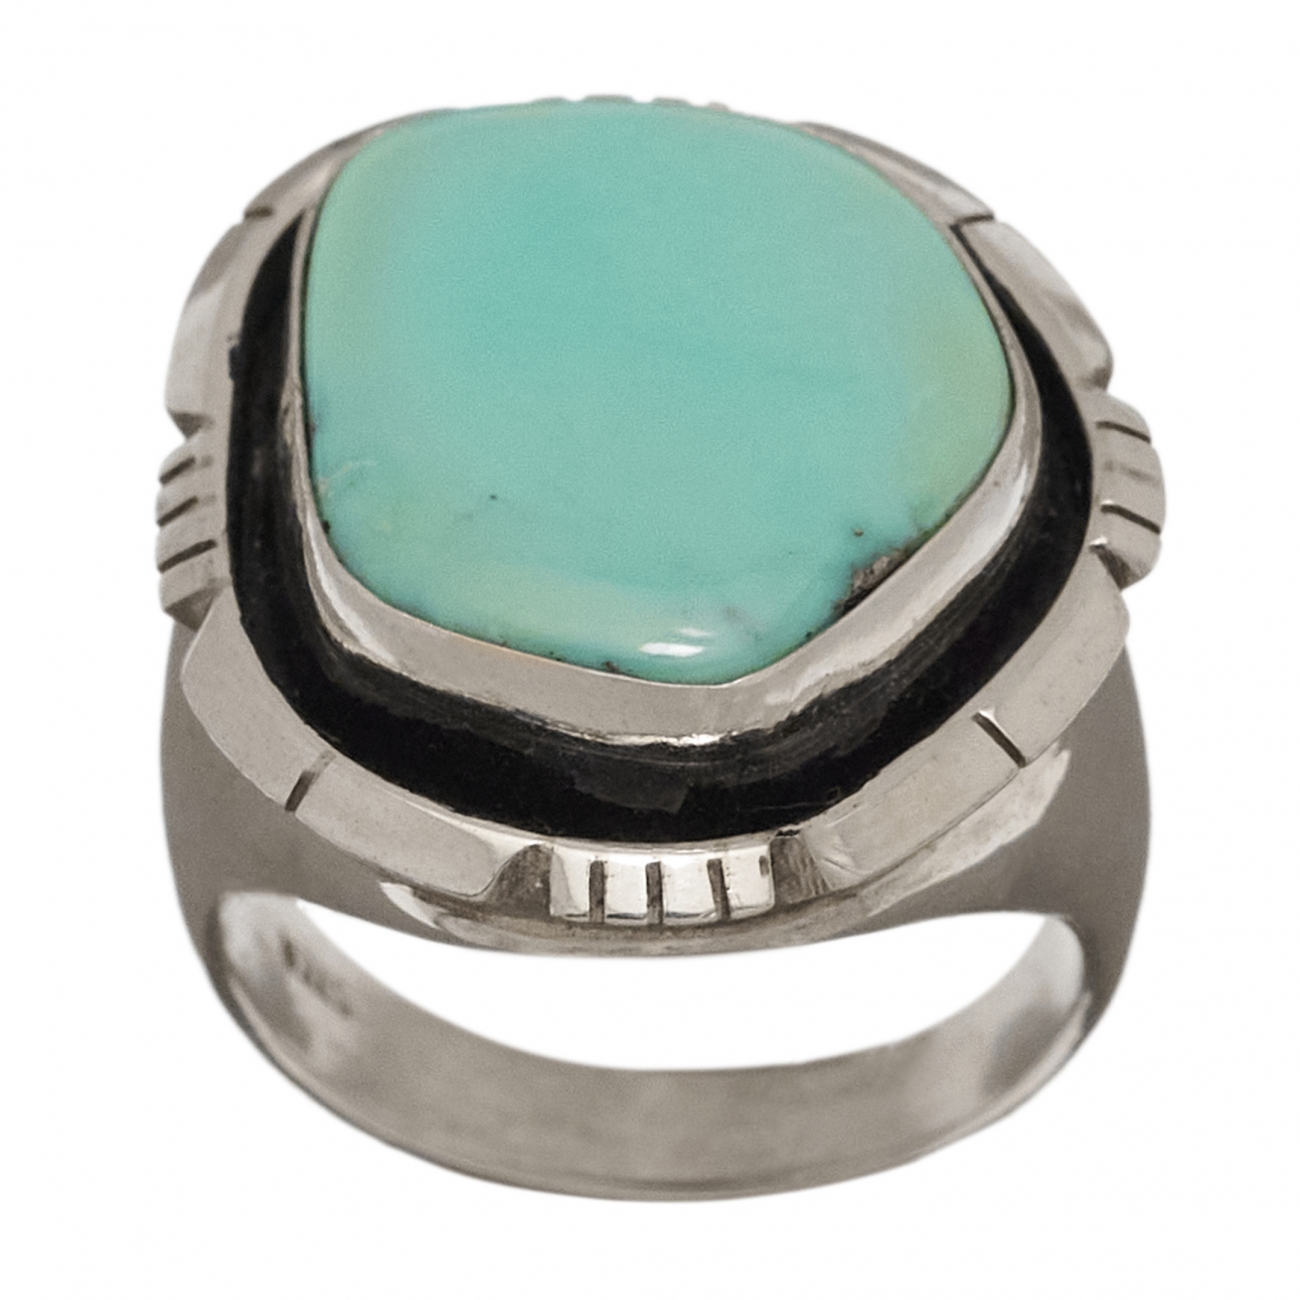 Navajo ring for men BA1194 in turquoise and silver - Harpo Paris